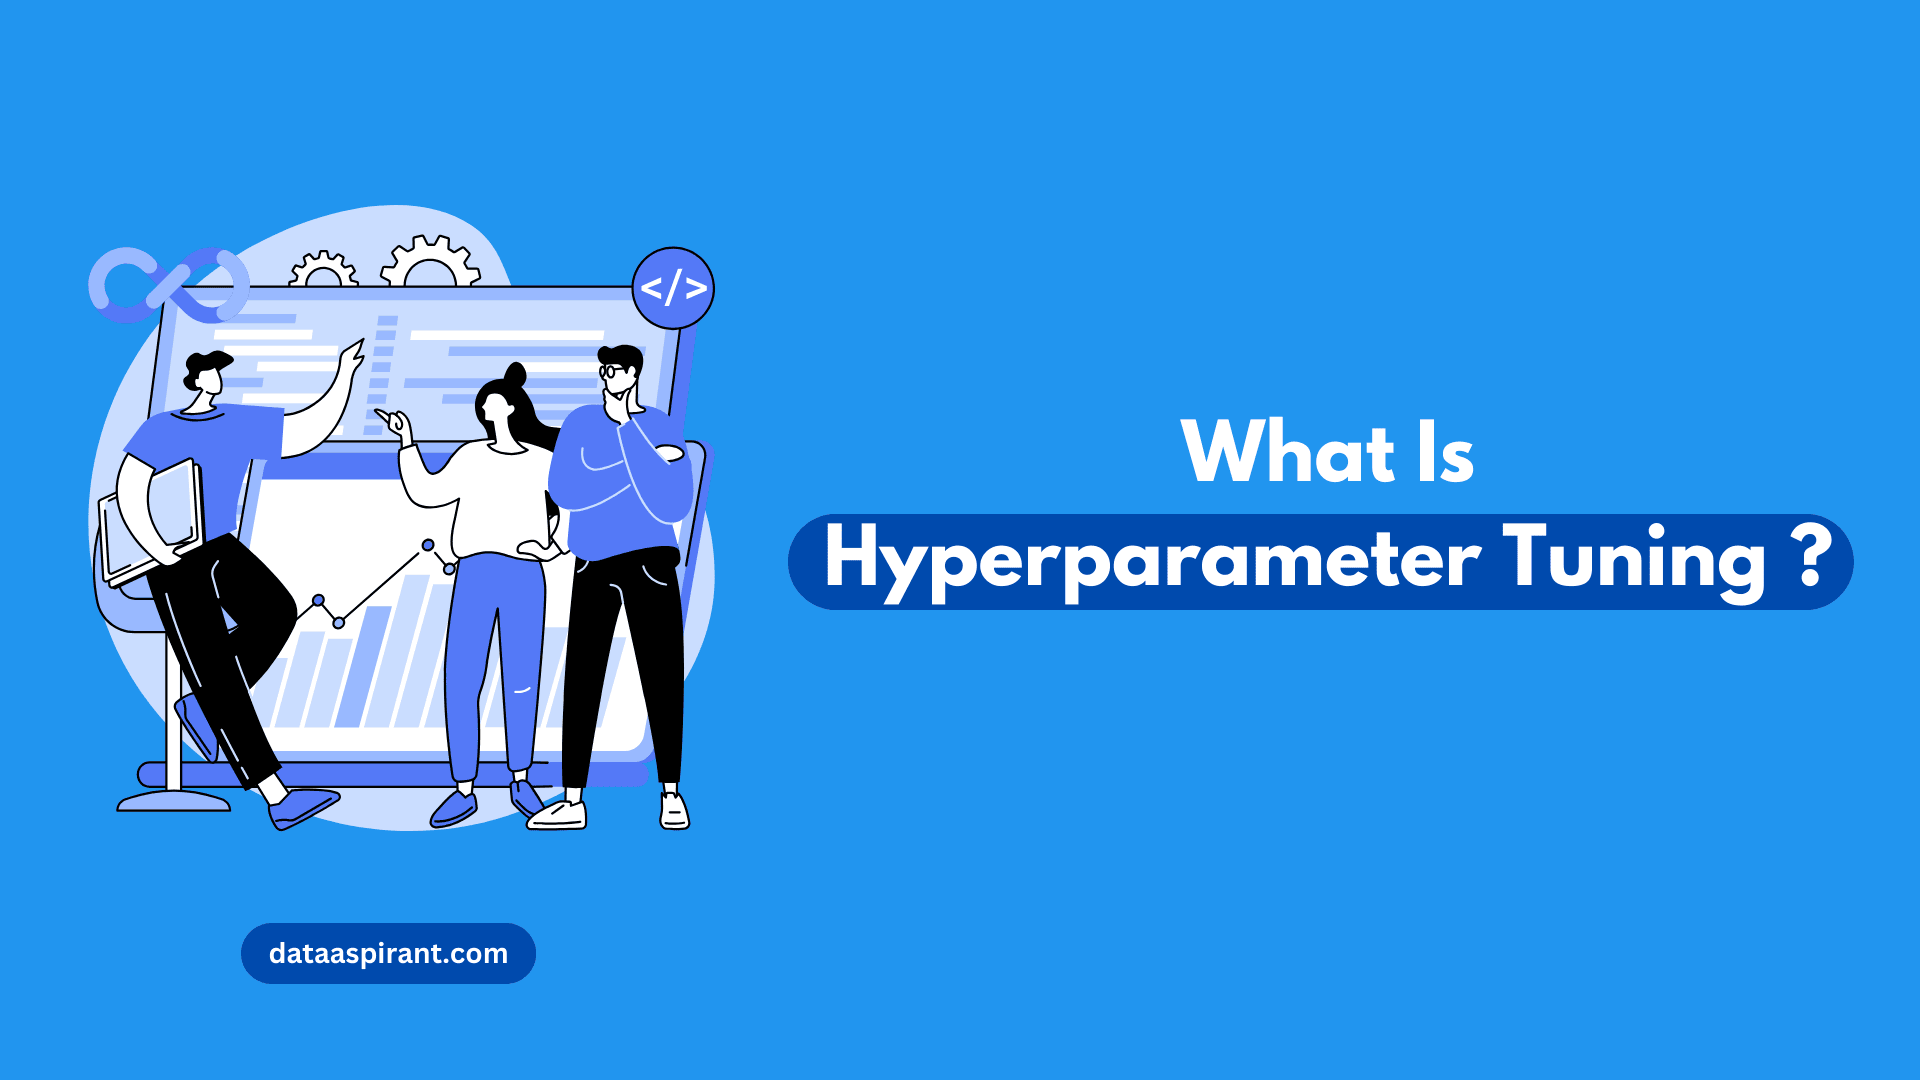 What is Hyperparameter Tuning?